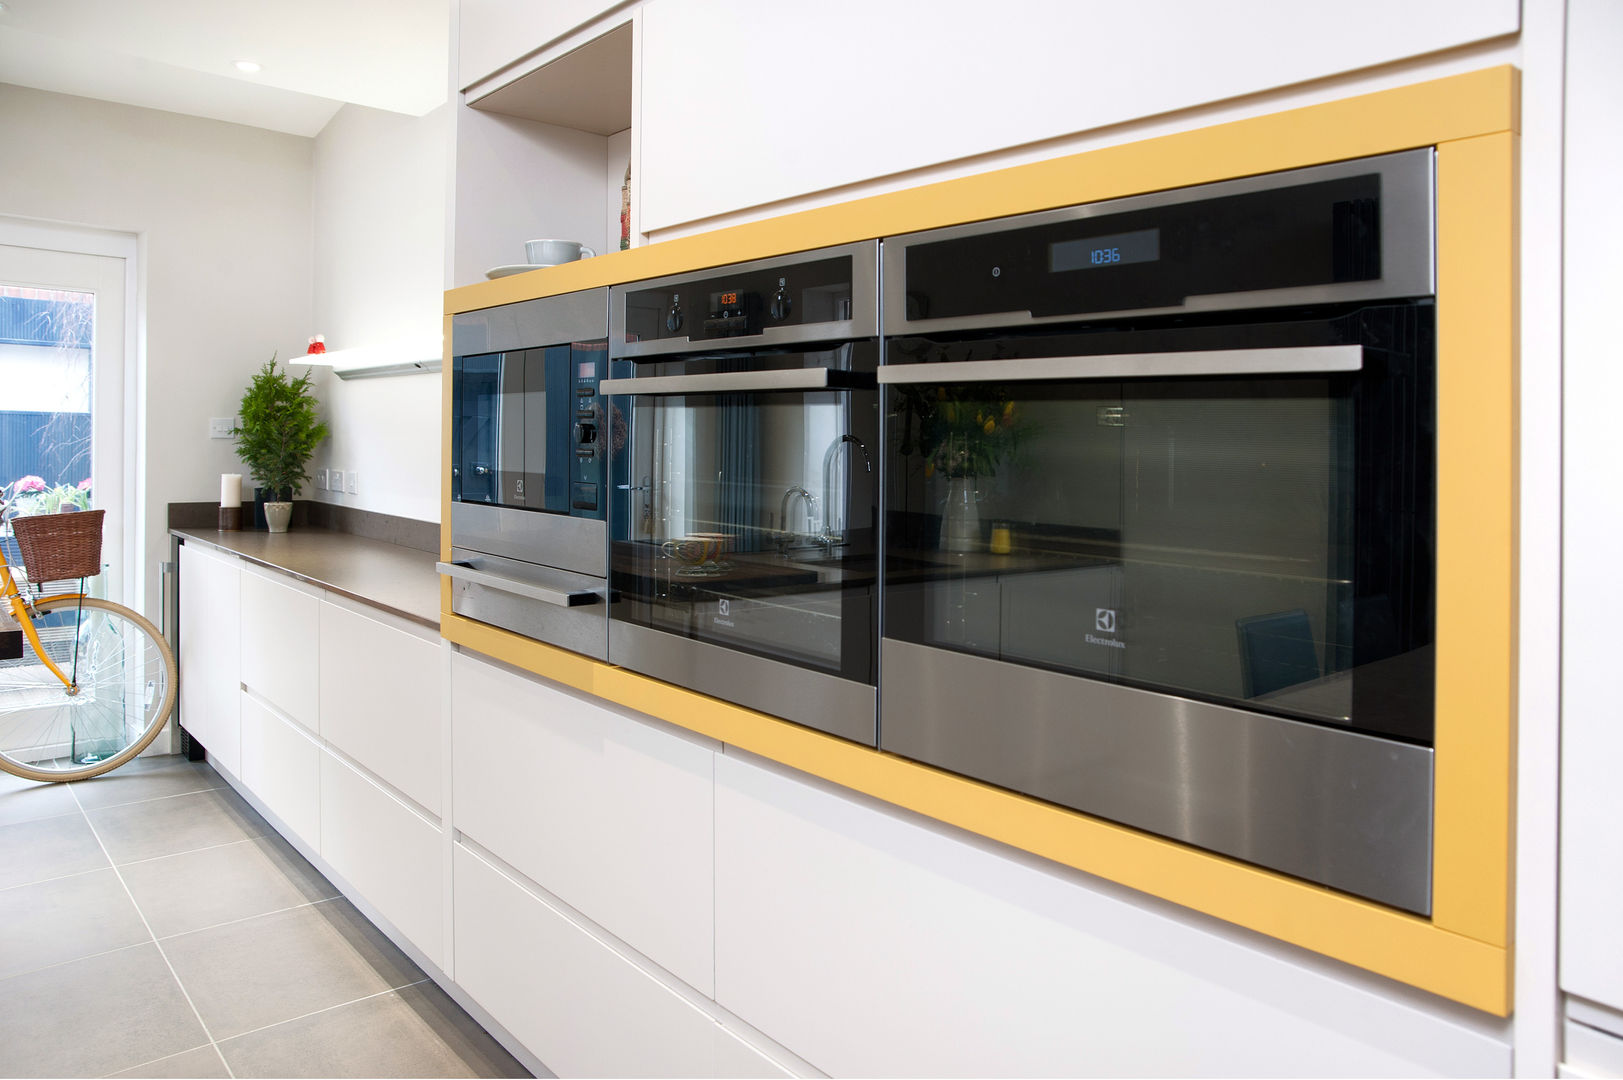 Electrolux appliances wrapped in Curry Yellow panelling Haus12 Interiors Kitchen